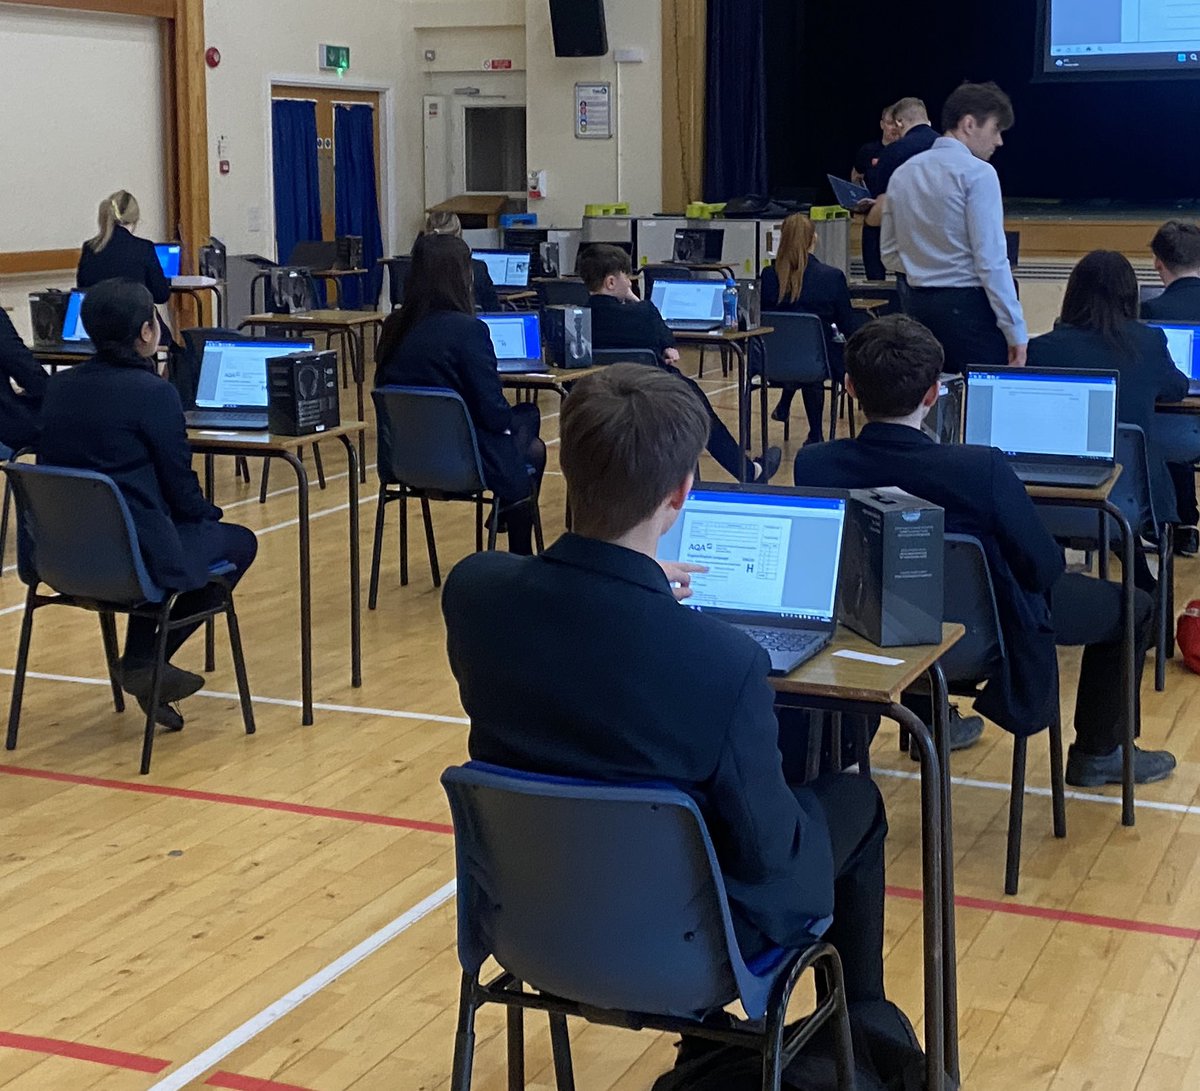 Exam Ready! @StPatsCollege’s brilliant team setting their students up for success using Read&Write, reducing need for human readers & multiple classrooms during exam season. #Inclusive practice in action 👏 Privileged to support the student training session today.